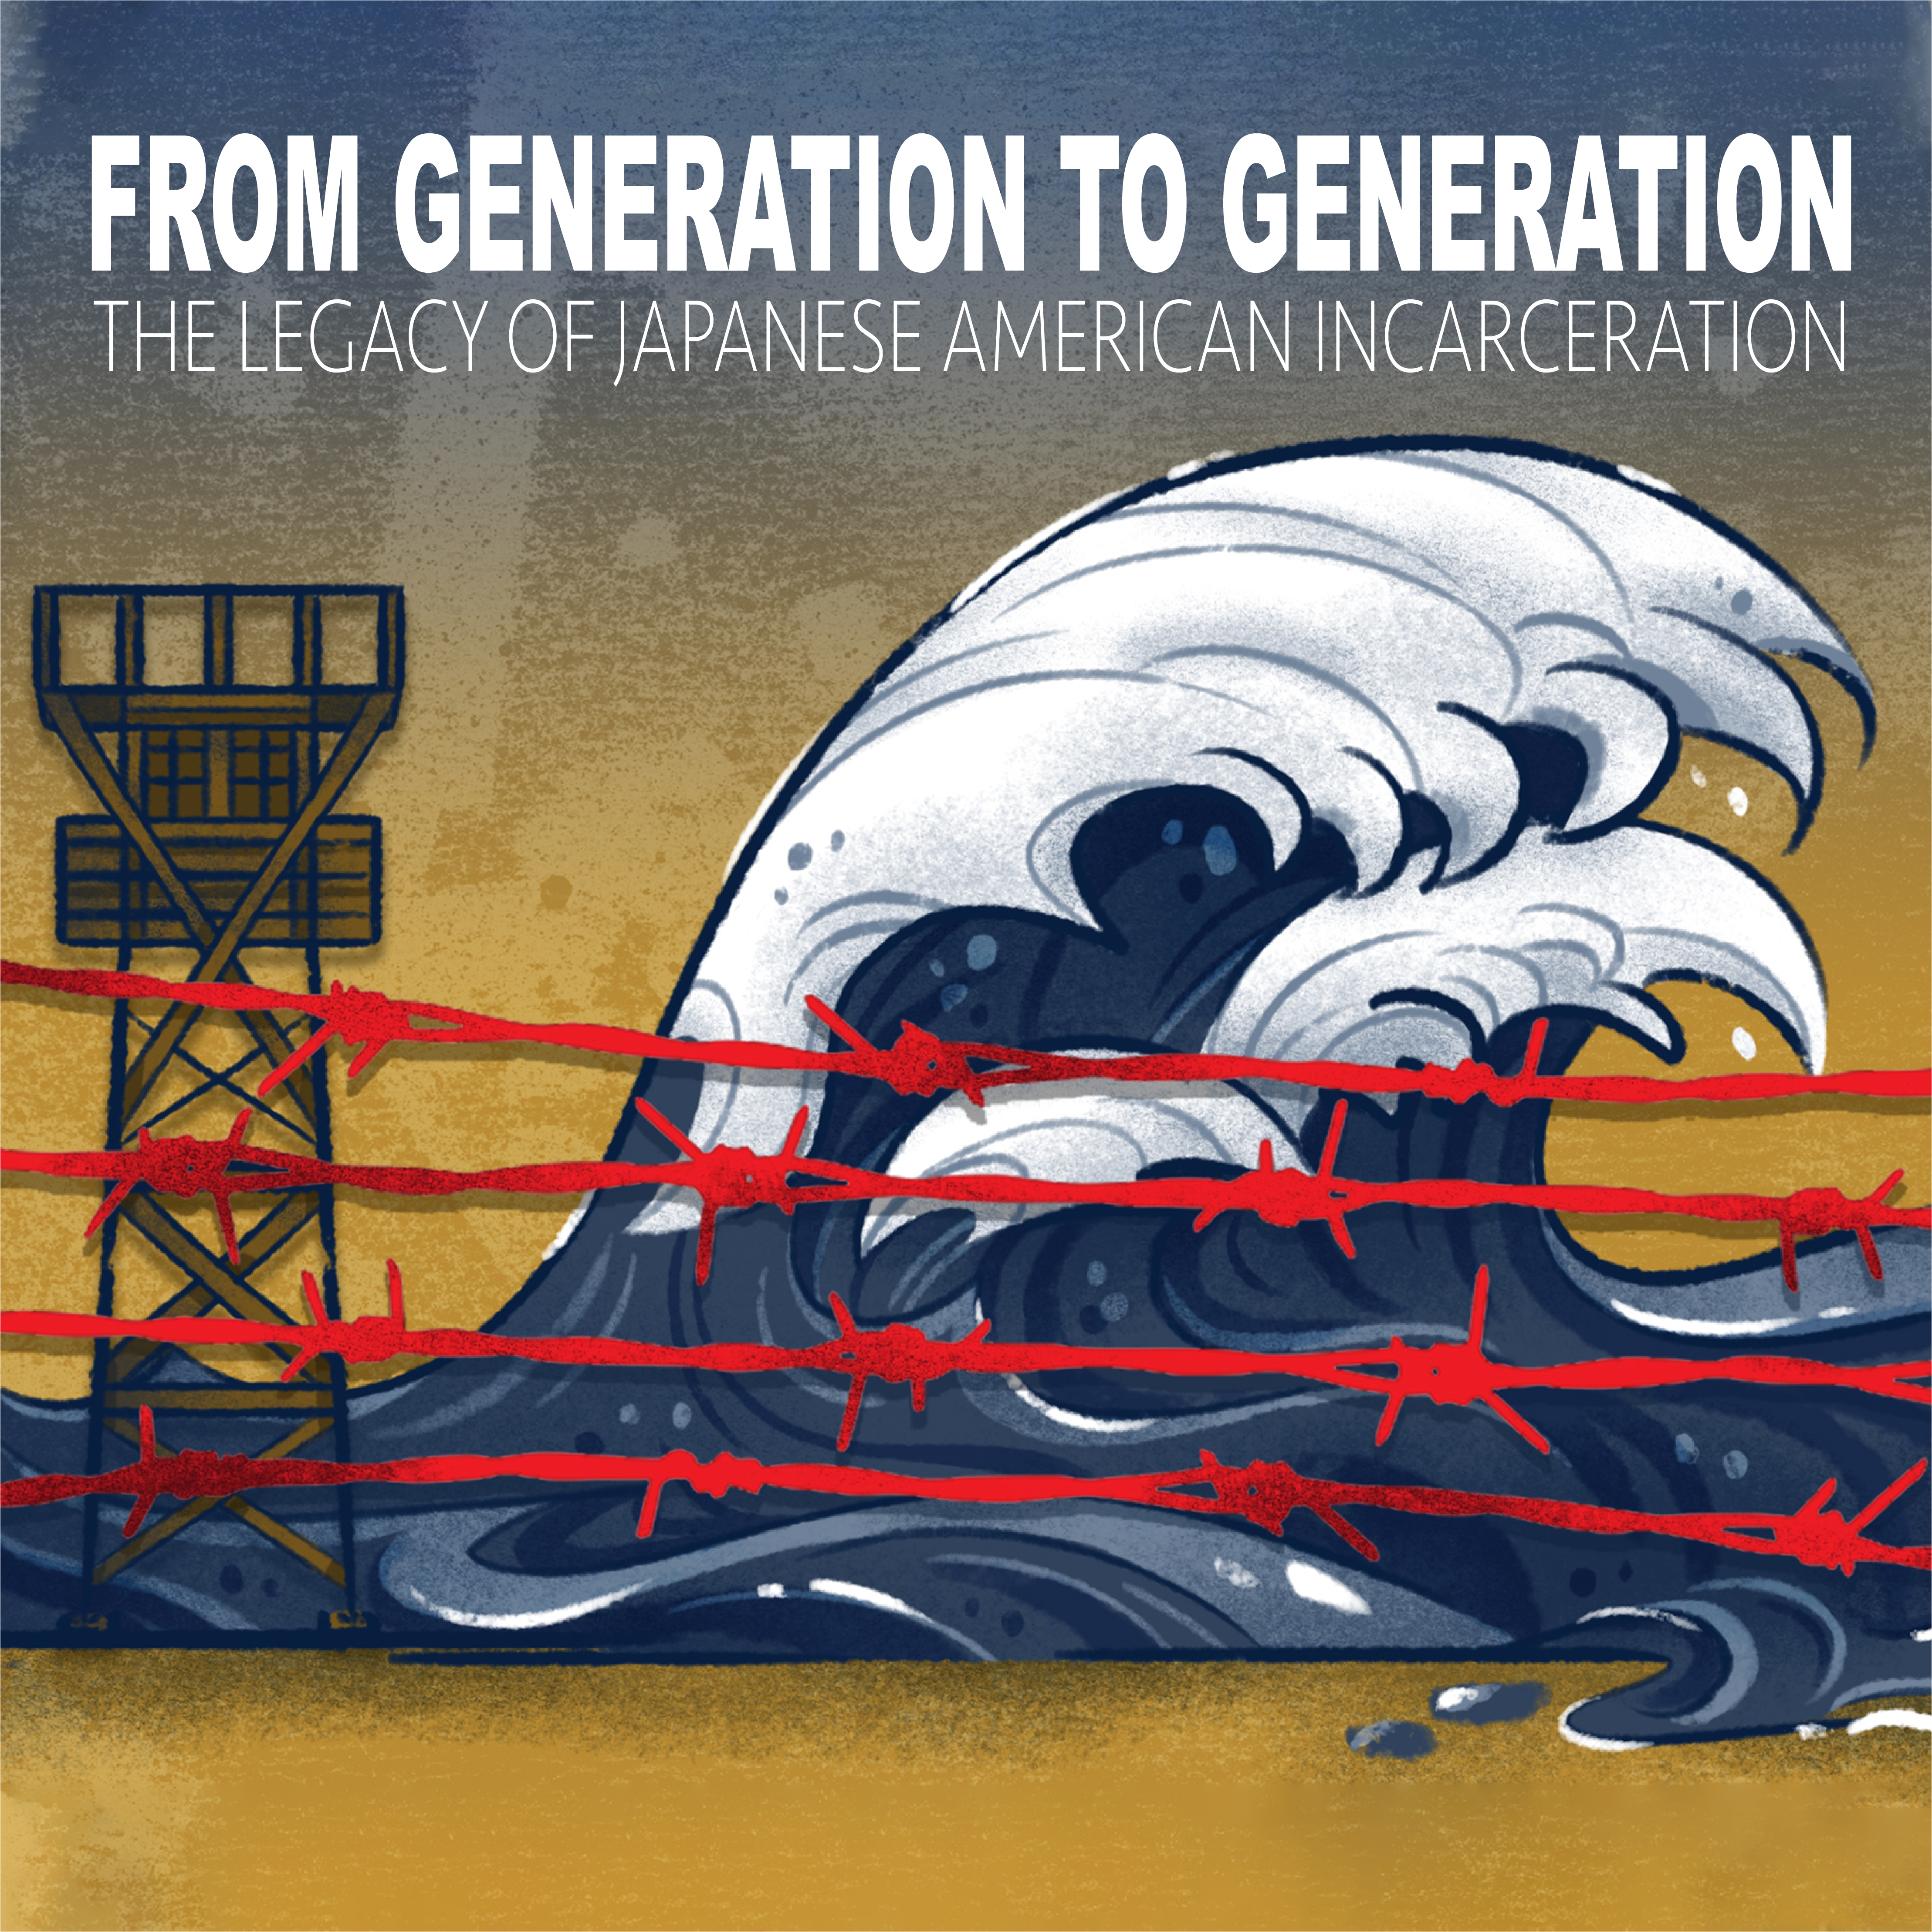 This graphic illustration depicts a large wave and guard tower behind barbed wire with text above that reads, "From Generation to Generation: The Legacy of Japanese American Incarceration."